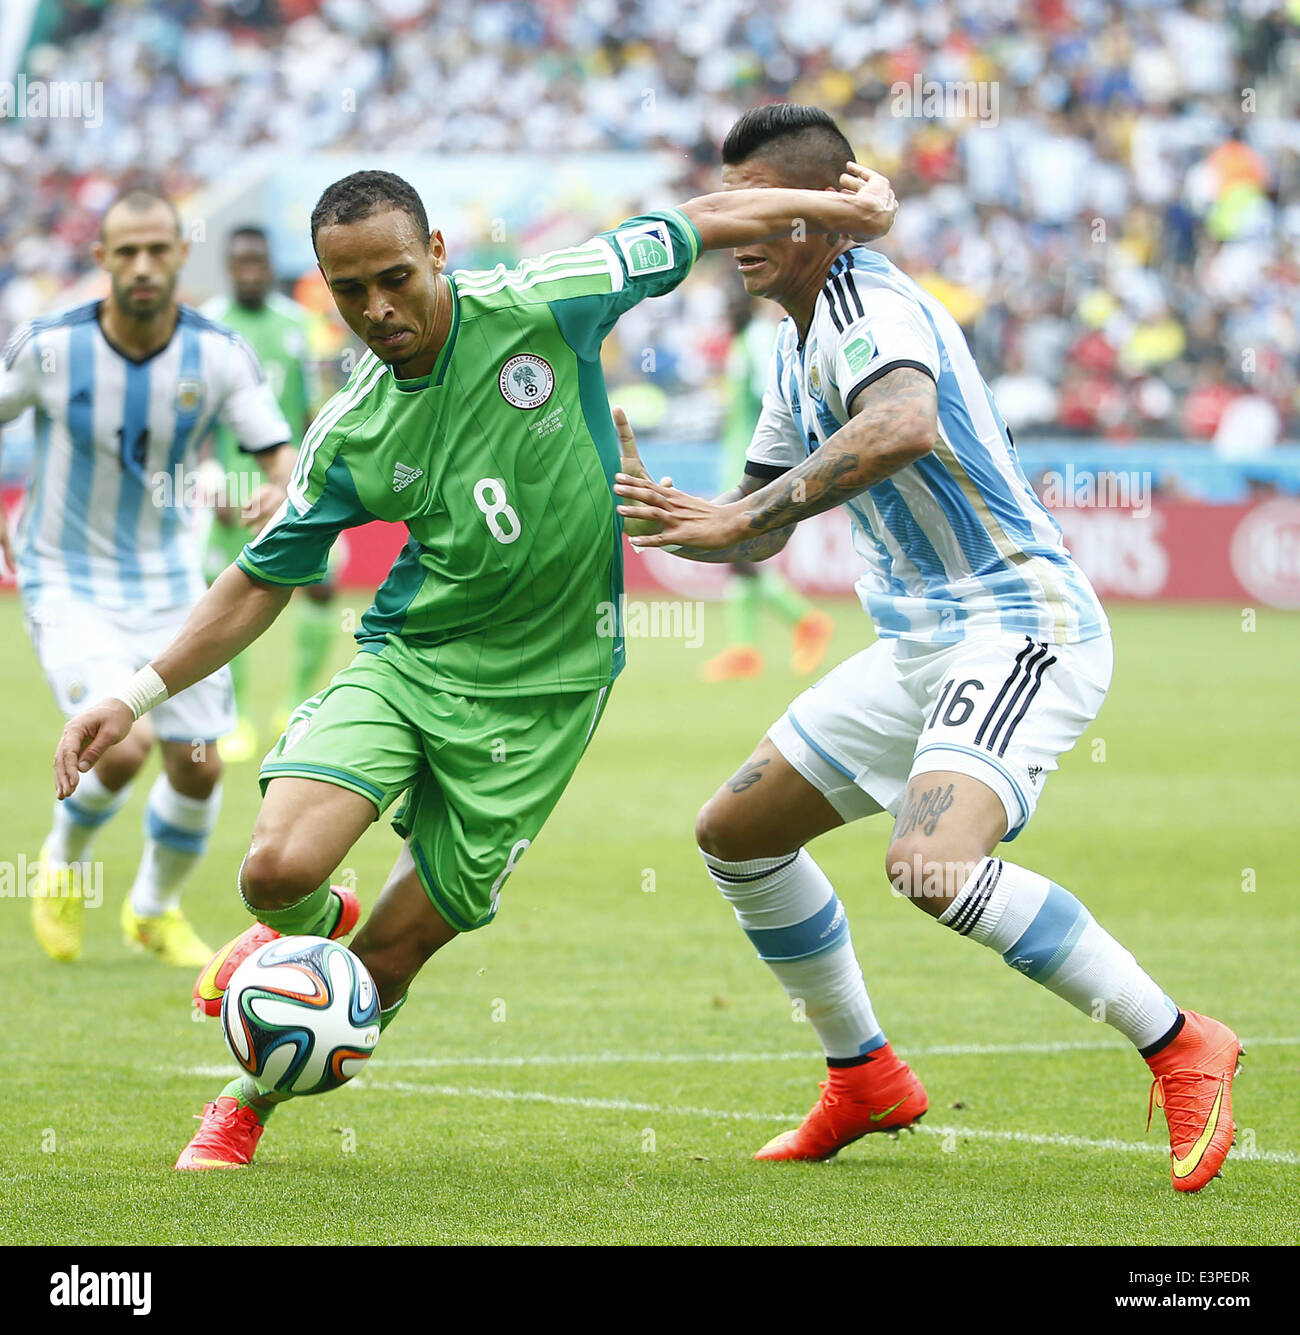 Porto Alegre, Brazil. 25th June, 2014. Nigeria's Peter Osaze Odemwingie (L, front) vies with Argentina's Marcos Rojo during a Group F match between Nigeria and Argentina of 2014 FIFA World Cup at the Estadio Beira-Rio Stadium in Porto Alegre, Brazil, on June 25, 2014. © Chen Jianli/Xinhua/Alamy Live News Stock Photo